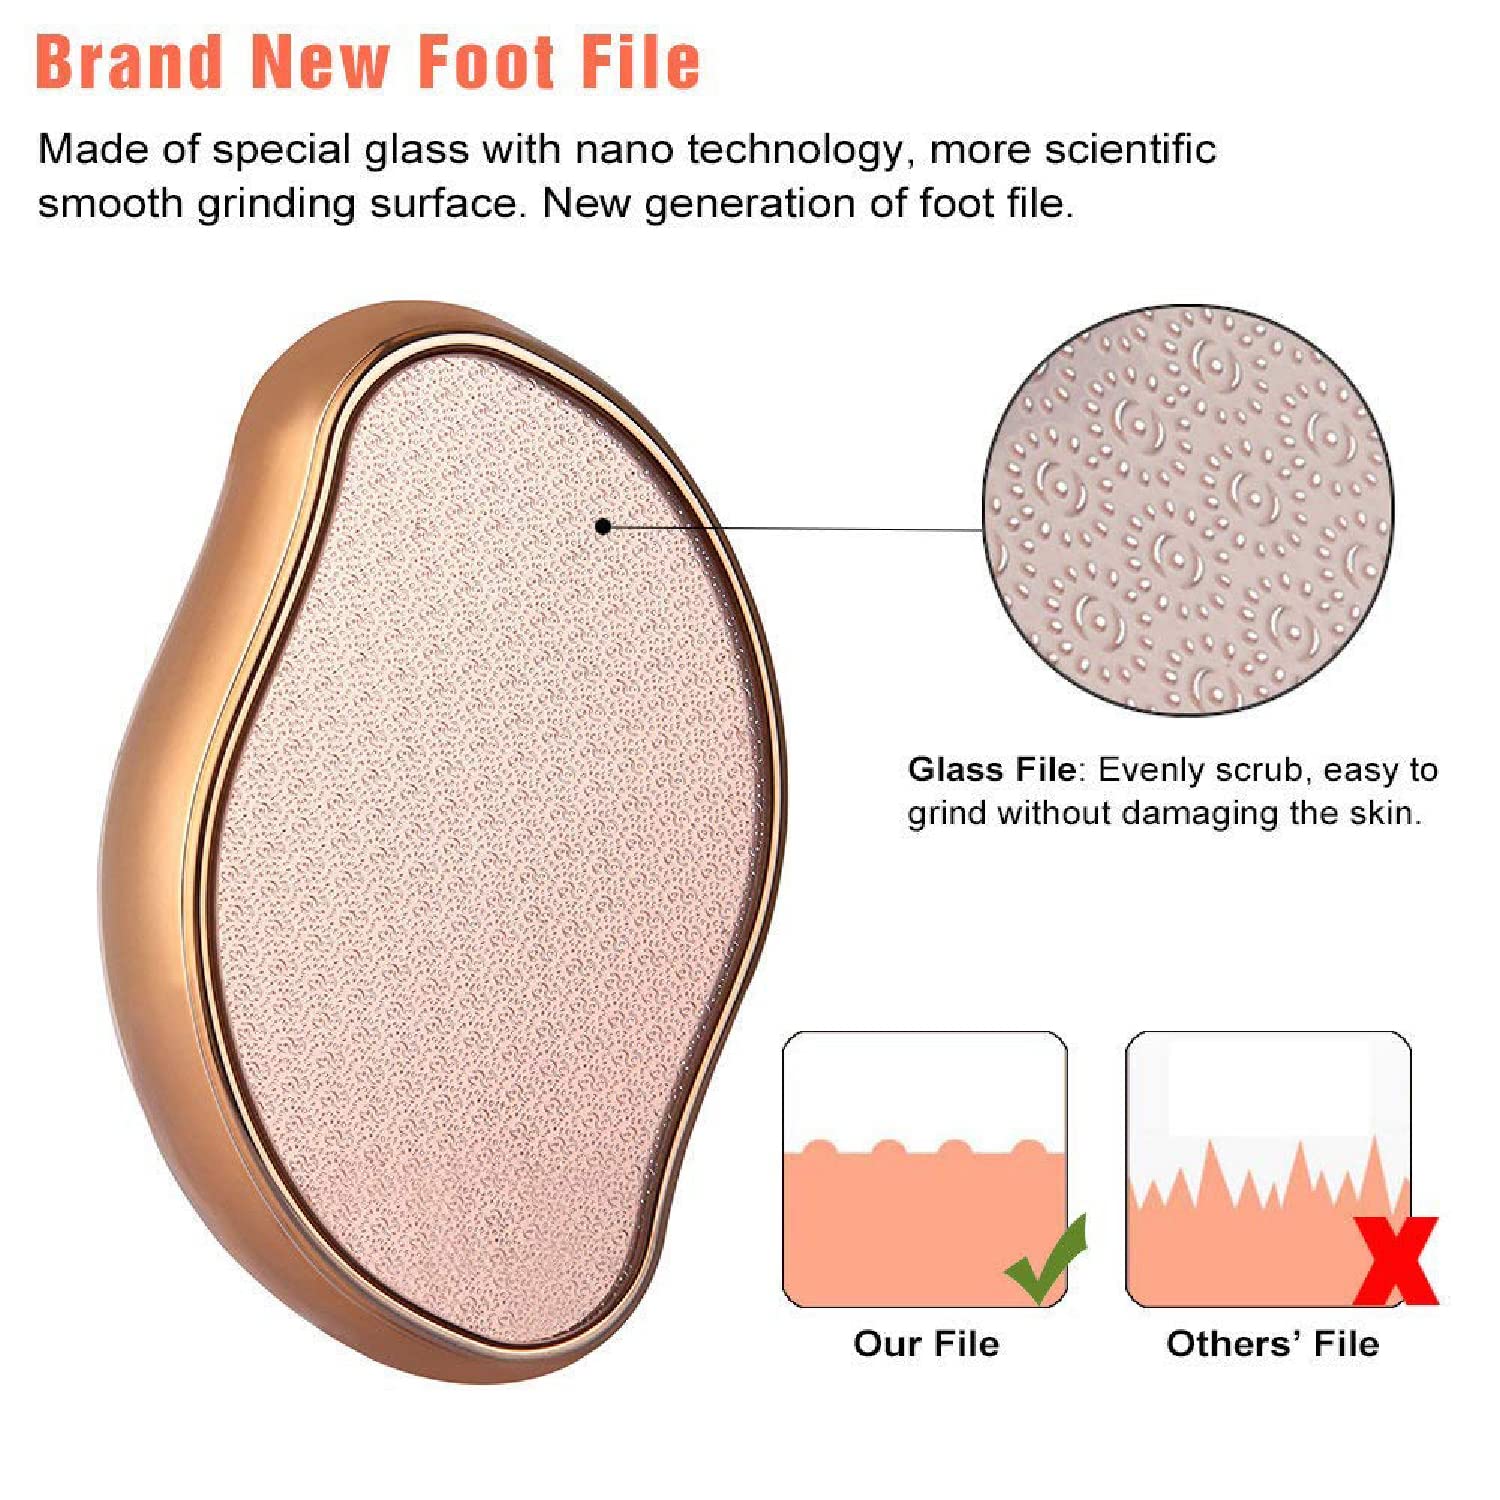 Dr Foot Glass File Callus Remover | For Feet, Dead Skin, Callus Remover | NANO GLASS CRYSTAL Removes Hard Skin, Leaves Feet Smooth | Foot Scraper Rasp LATEST INNOVATION - ROSE GOLD (Pack of 2)